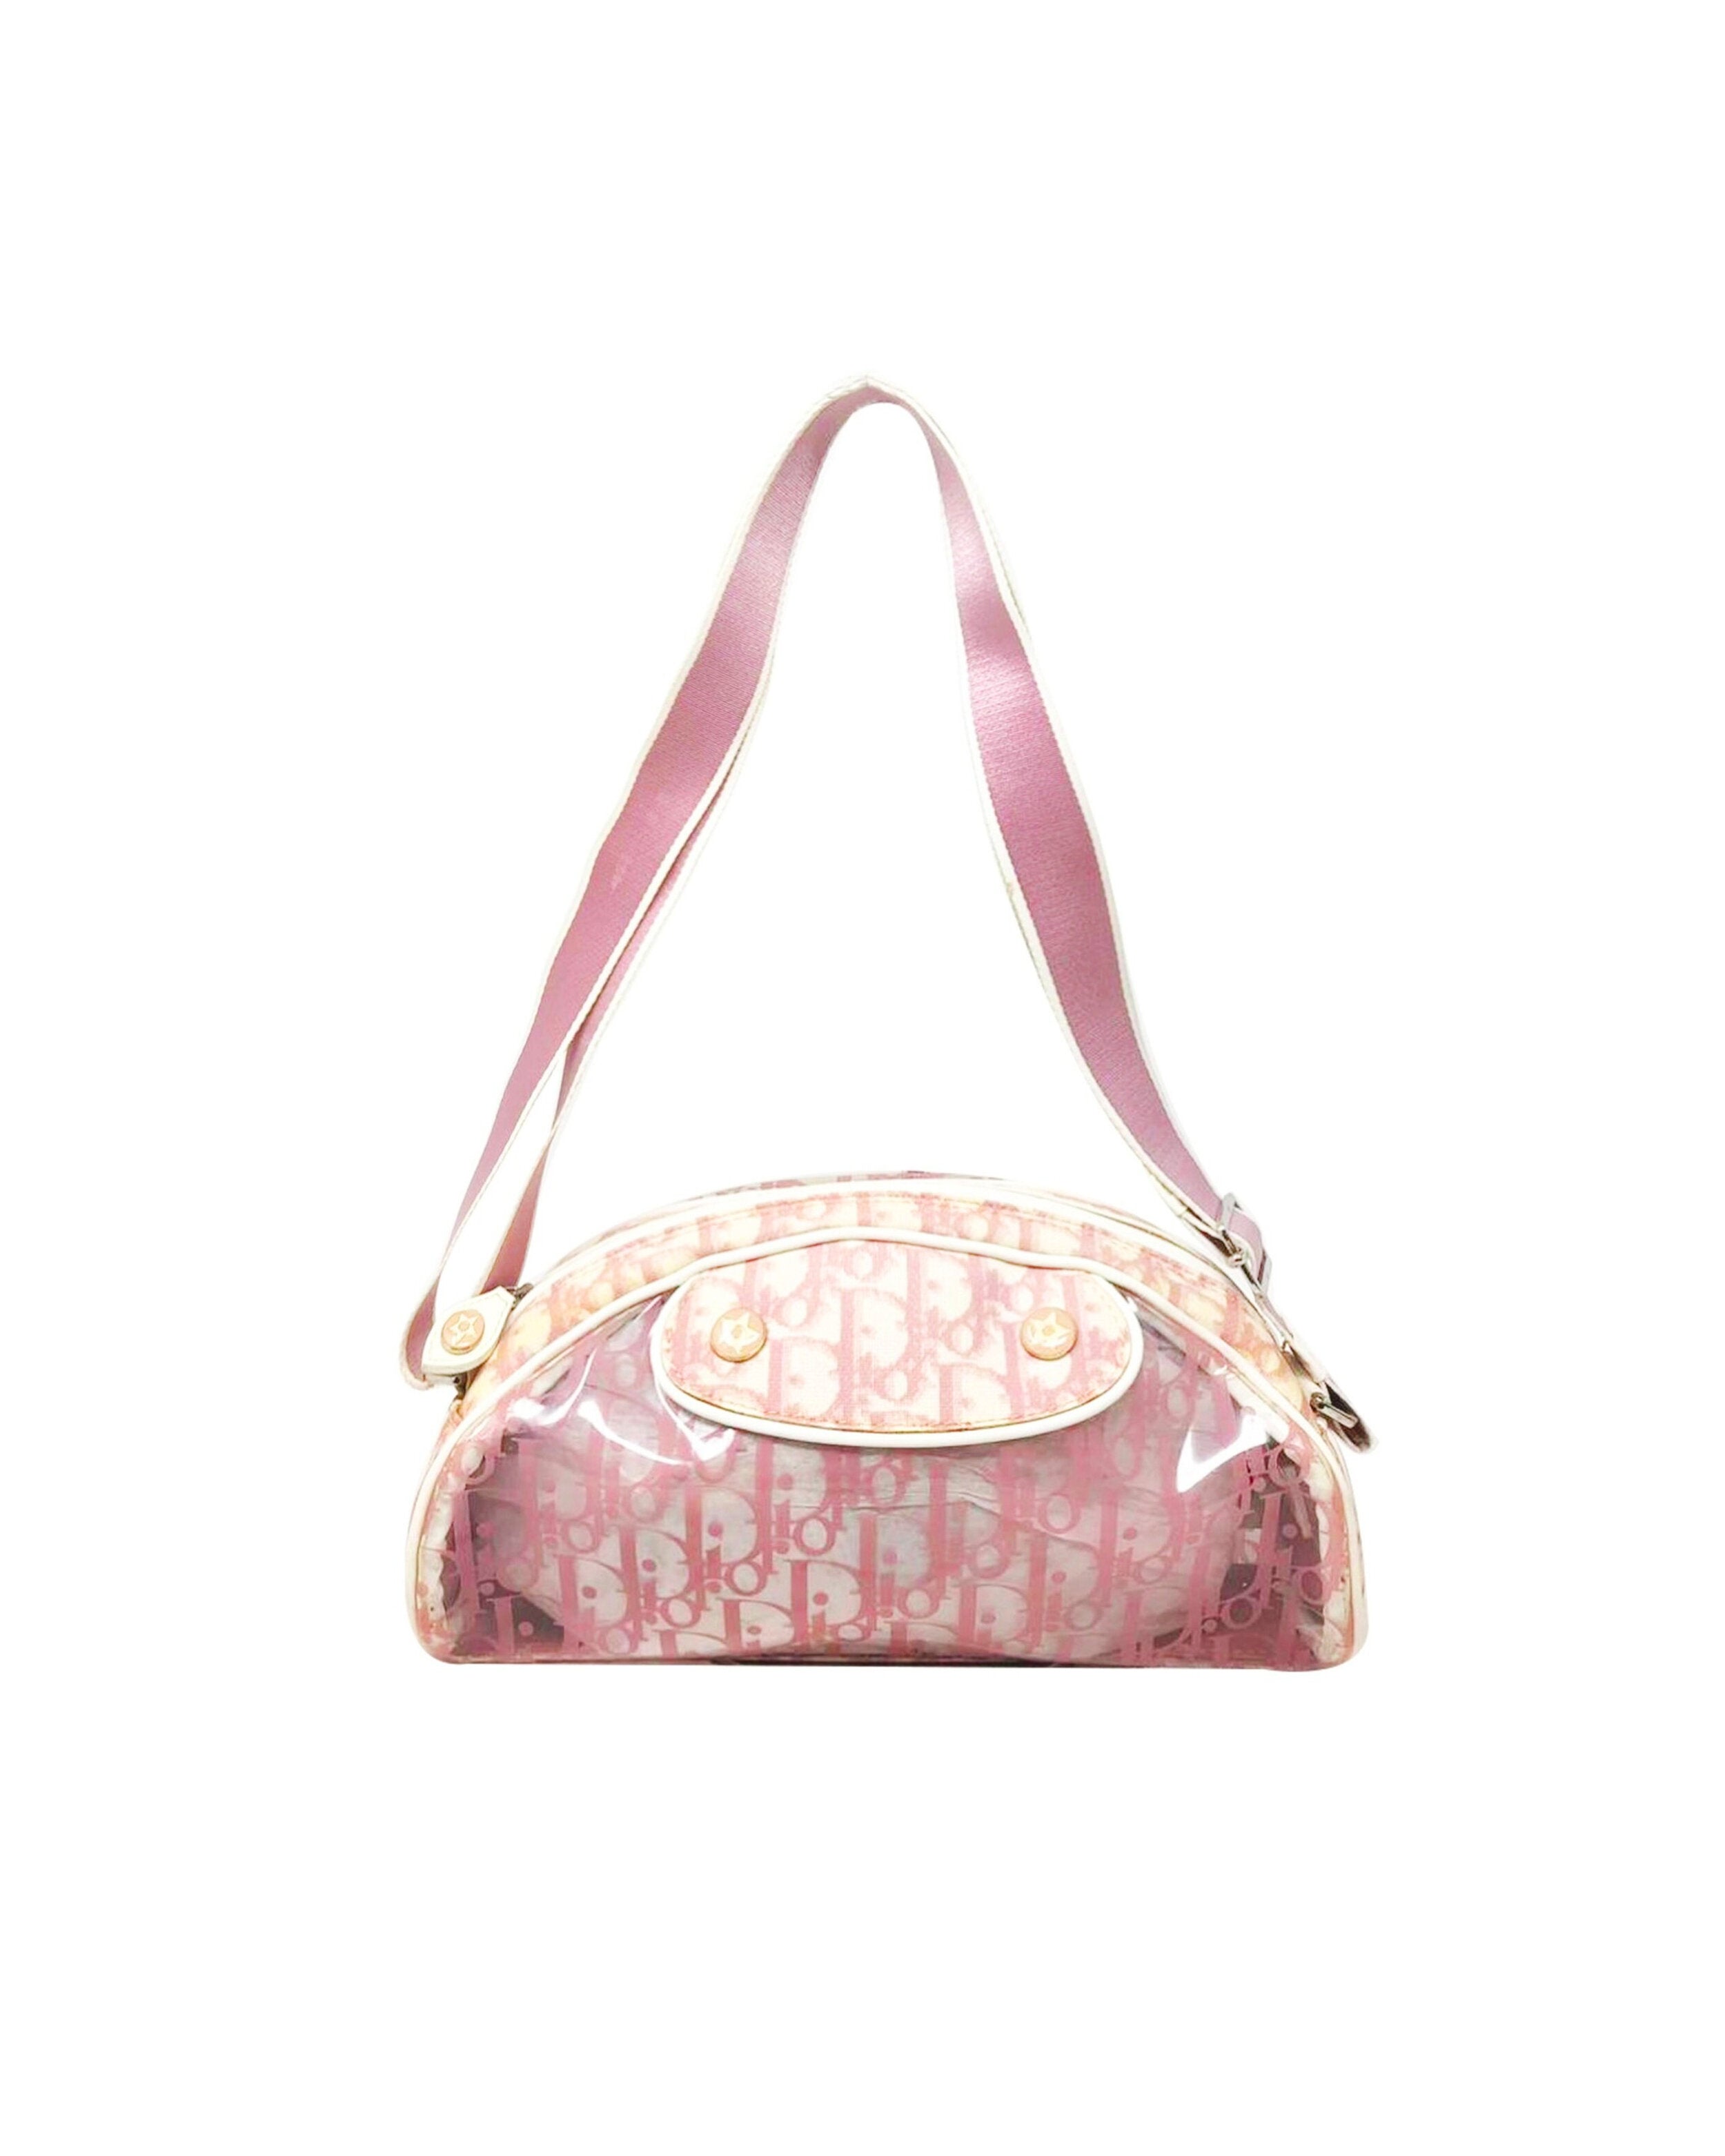 8 Vintage Dior early 2000s pink Boston bag ideas